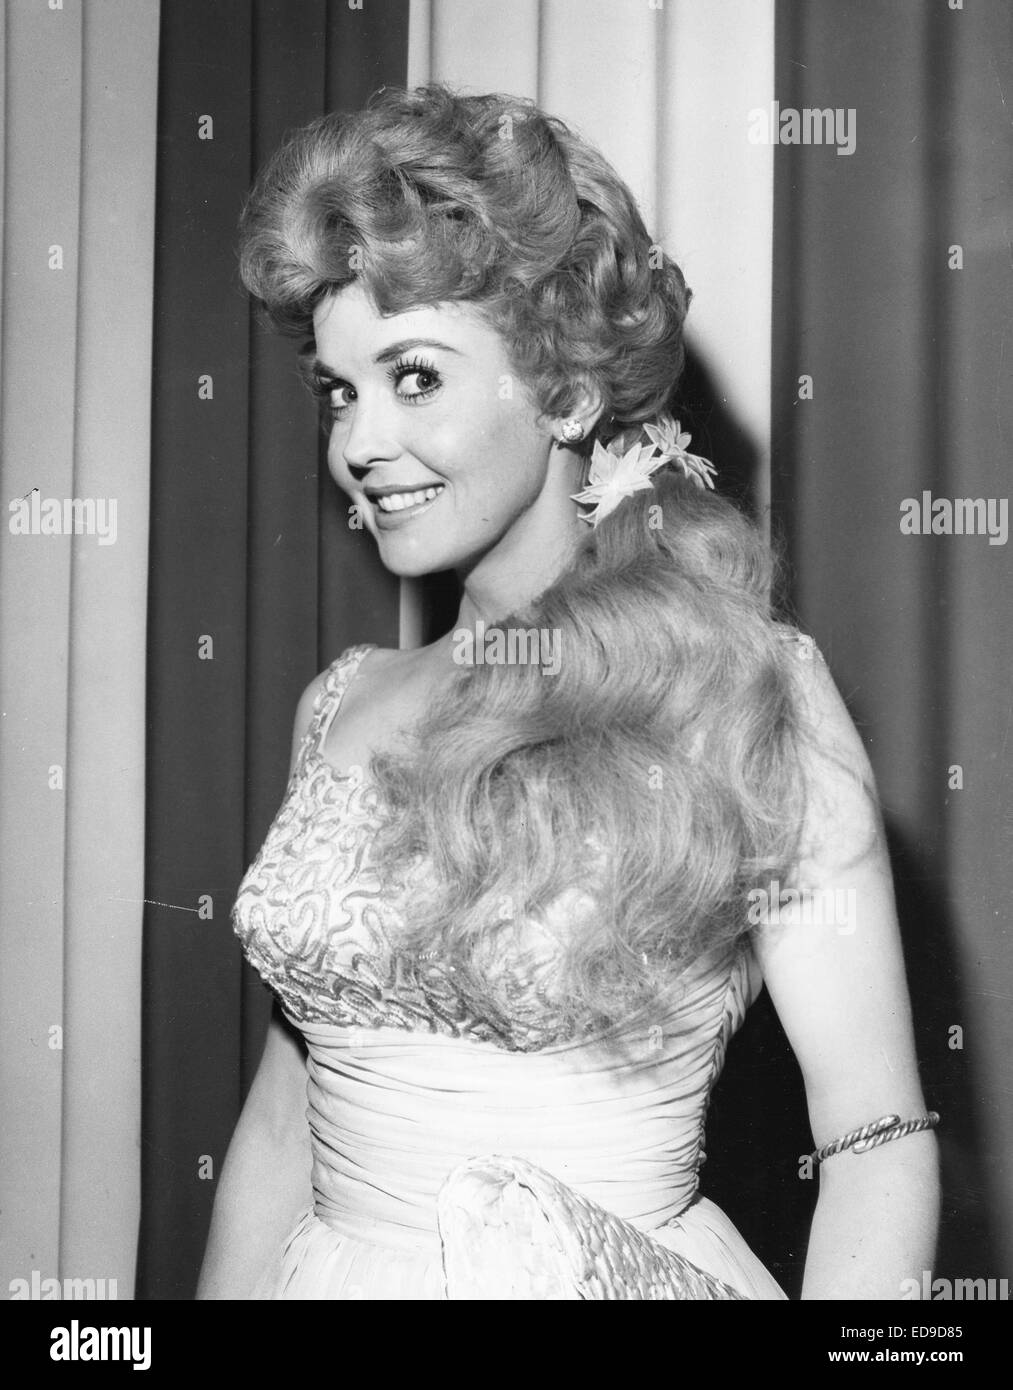 File. 2nd Jan, 2015. Donna Douglas, who played hillbilly bombshell Elly May Clampett on the baby-boomer-beloved 1960s sitcom The Beverly Hillbillies, has died in her Louisiana home. She was 81. PICTURED: July 20, 2011 - DONNA DOUGLAS. © Globe Photos/ZUMAPRESS.com/Alamy Live News Stock Photo